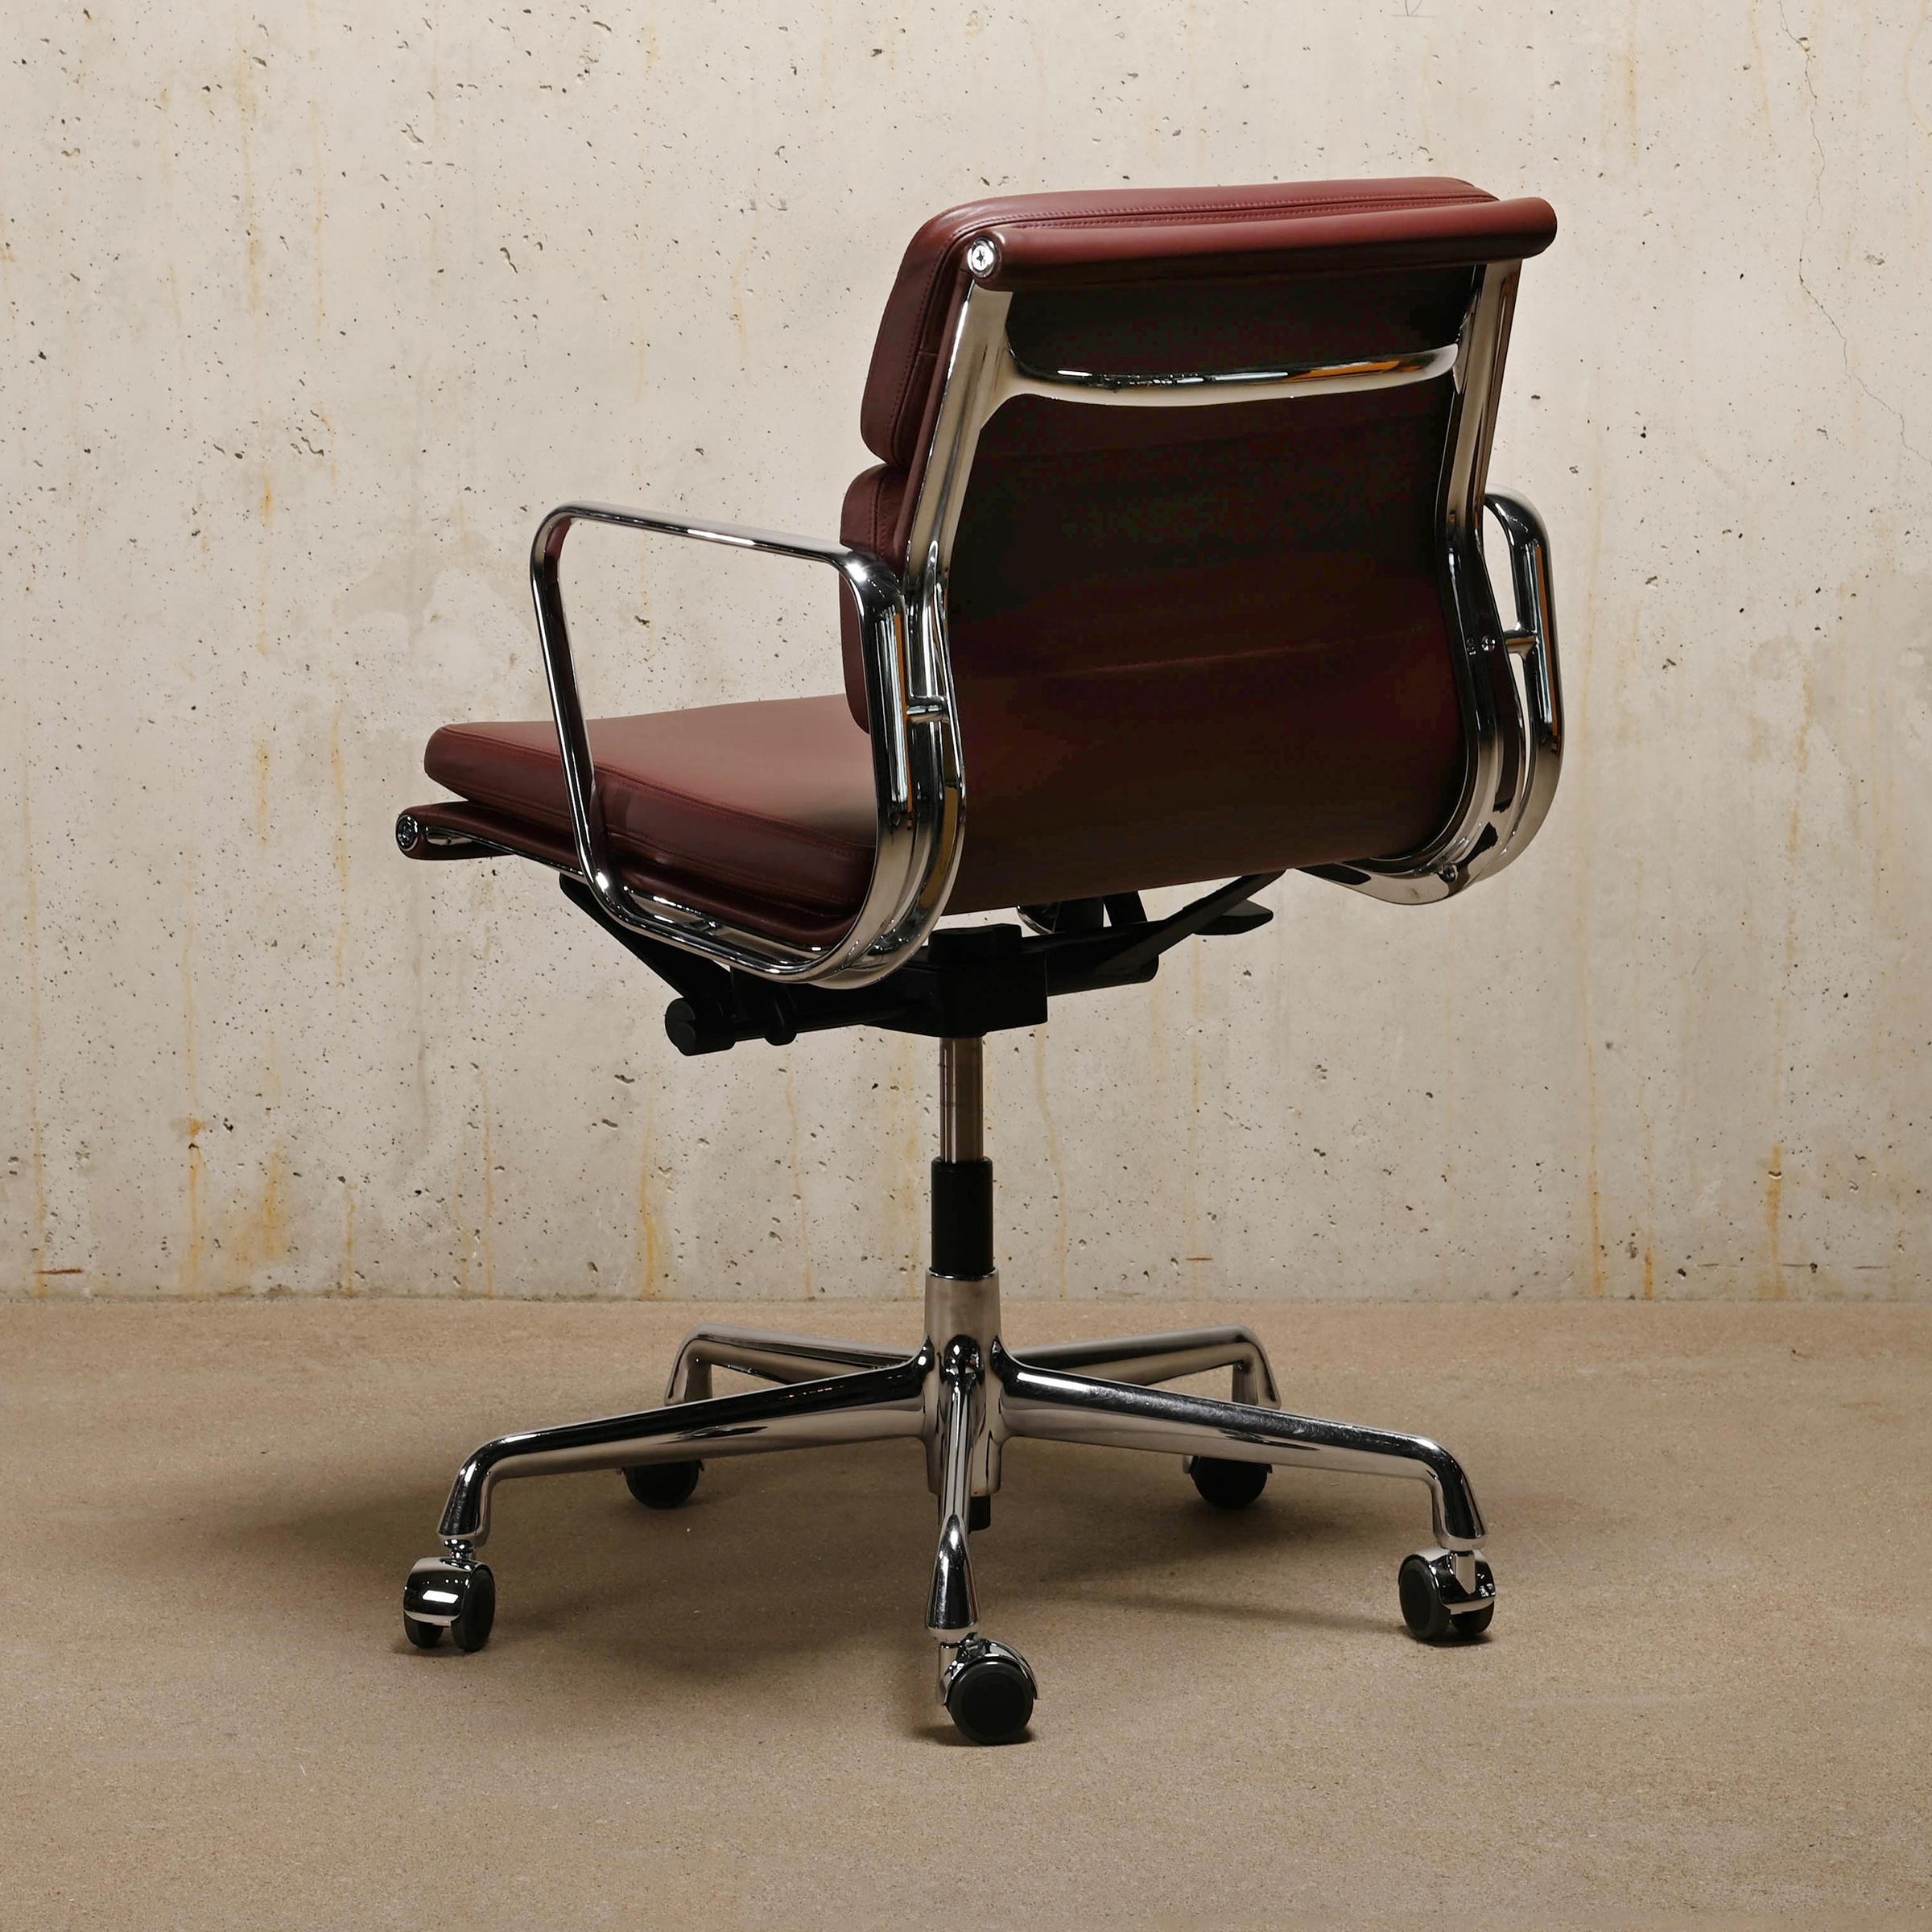 Mid-20th Century Charles & Ray Eames EA217 Office Chair in Brandy Leather and Chrome, Vitra